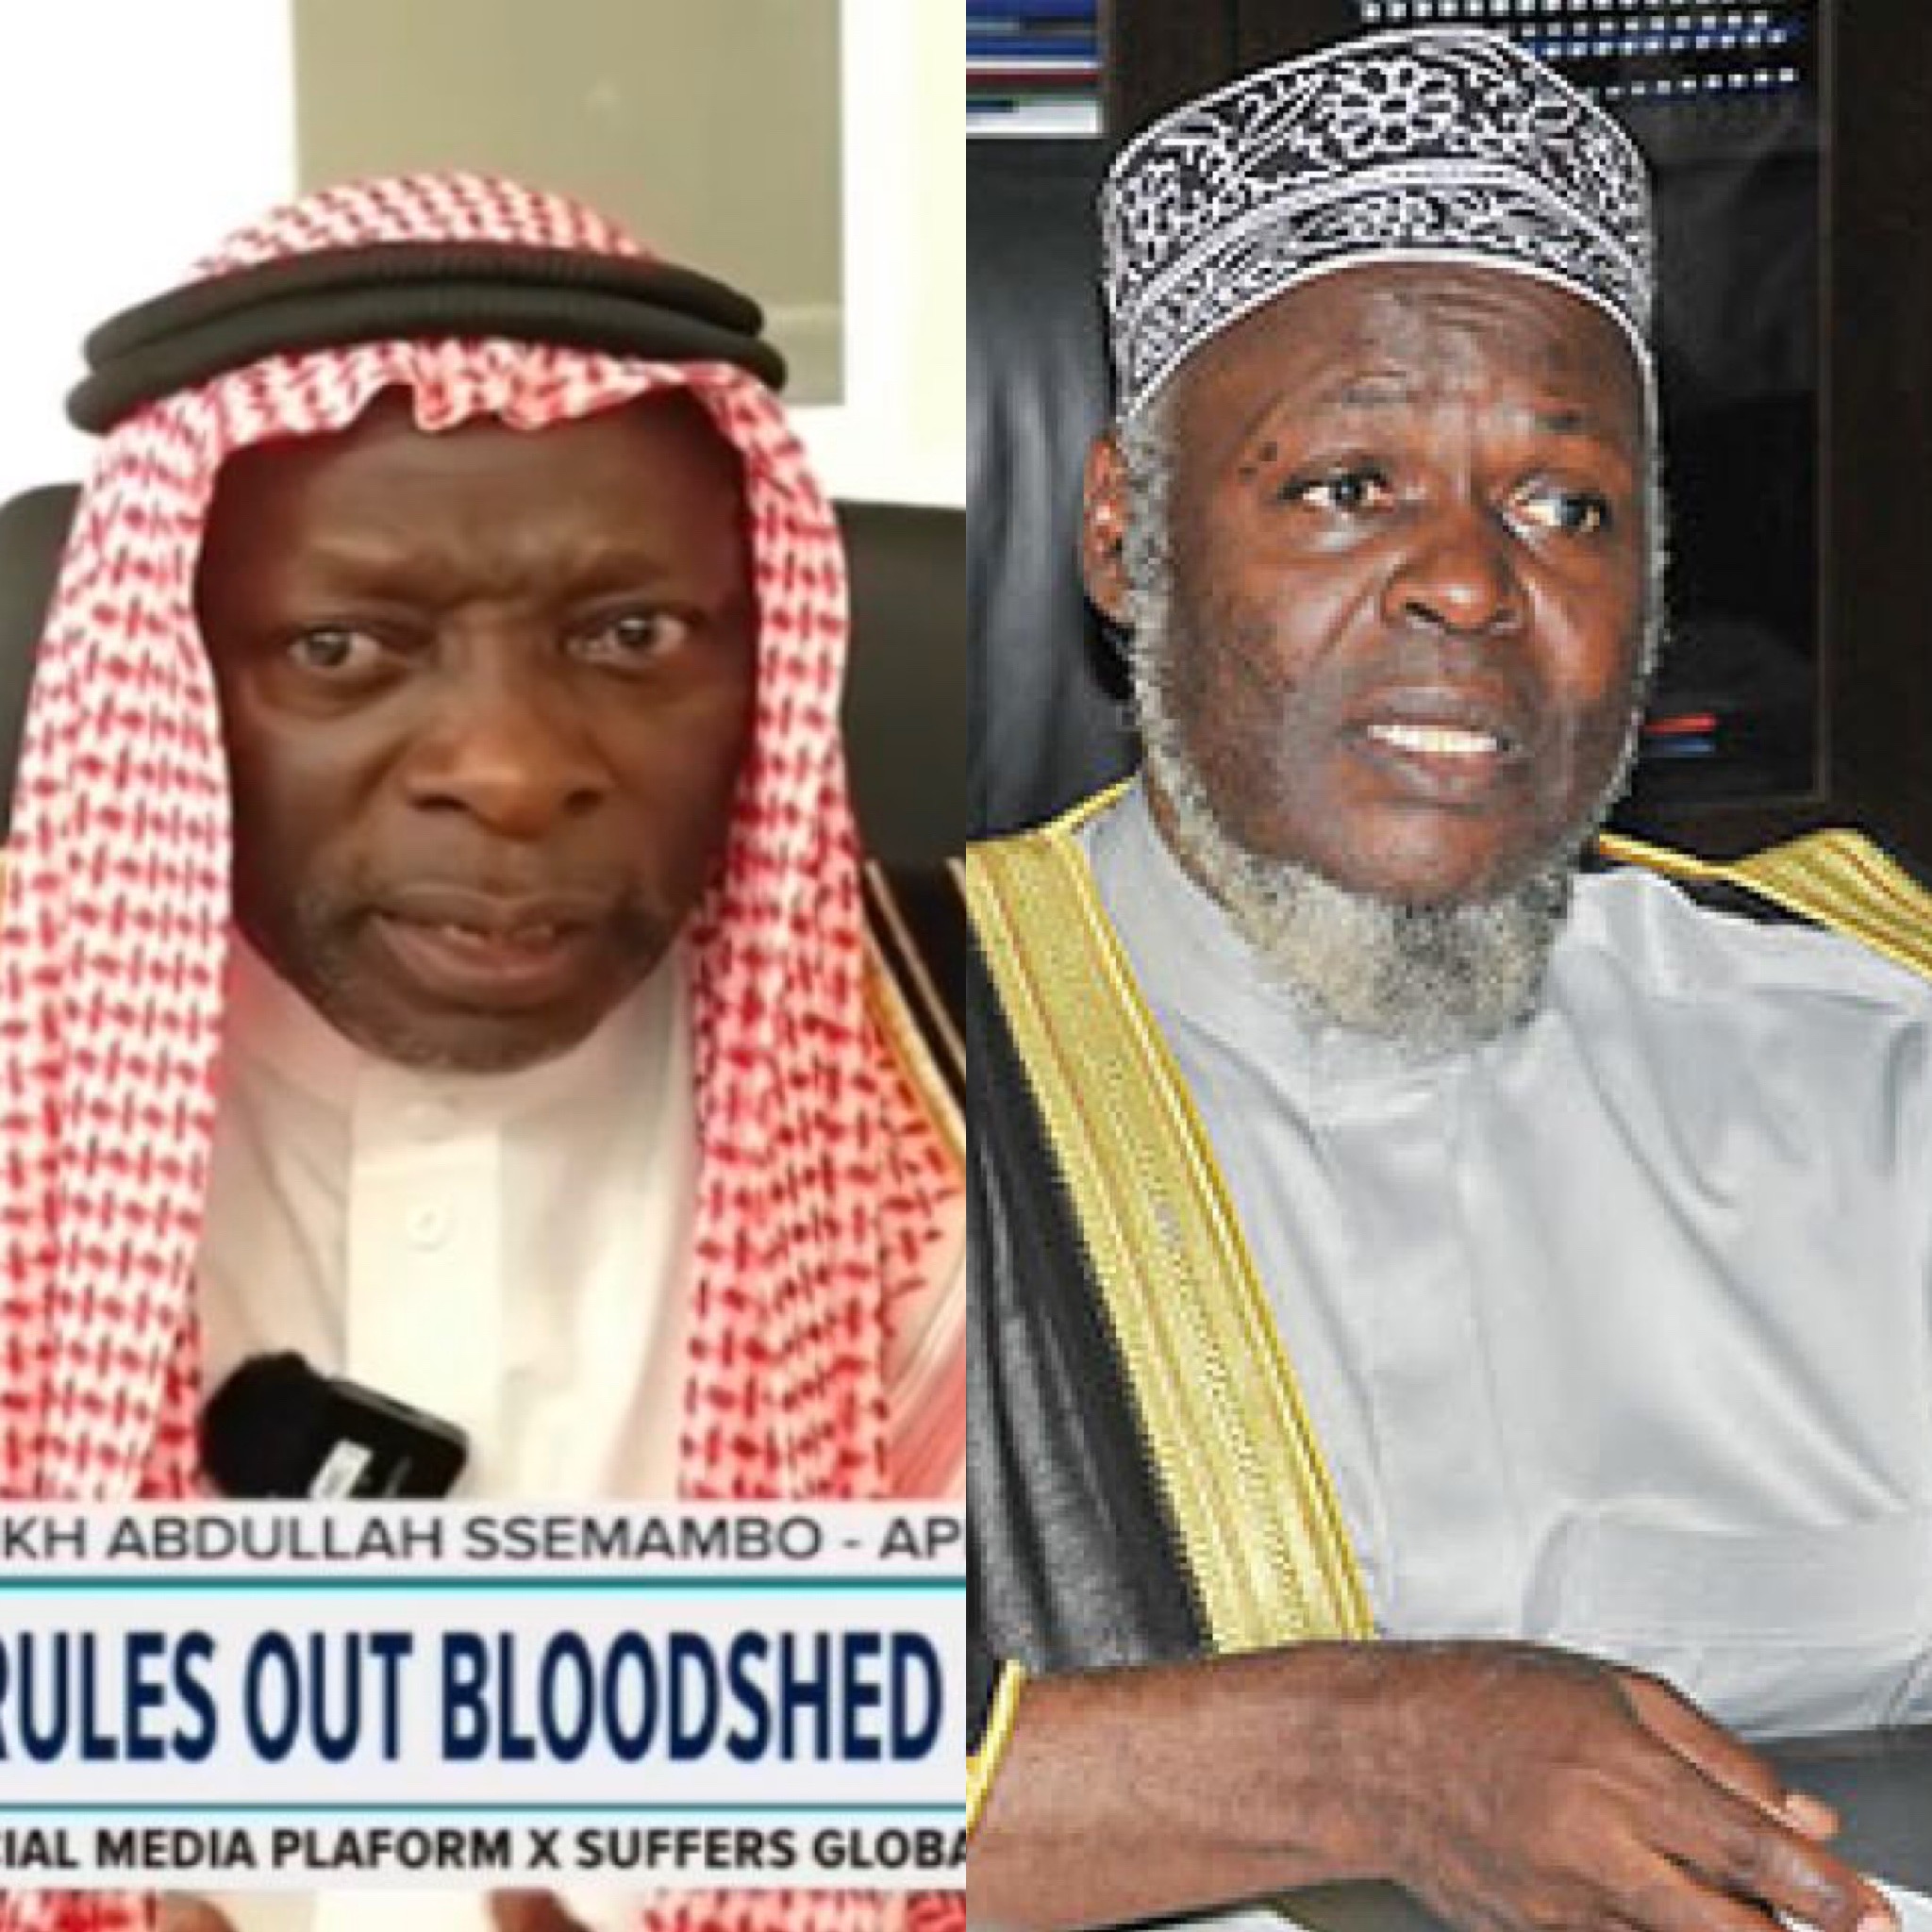 Exclusive: Mubaje's leadership crisis sparks fear of new Muslim faction